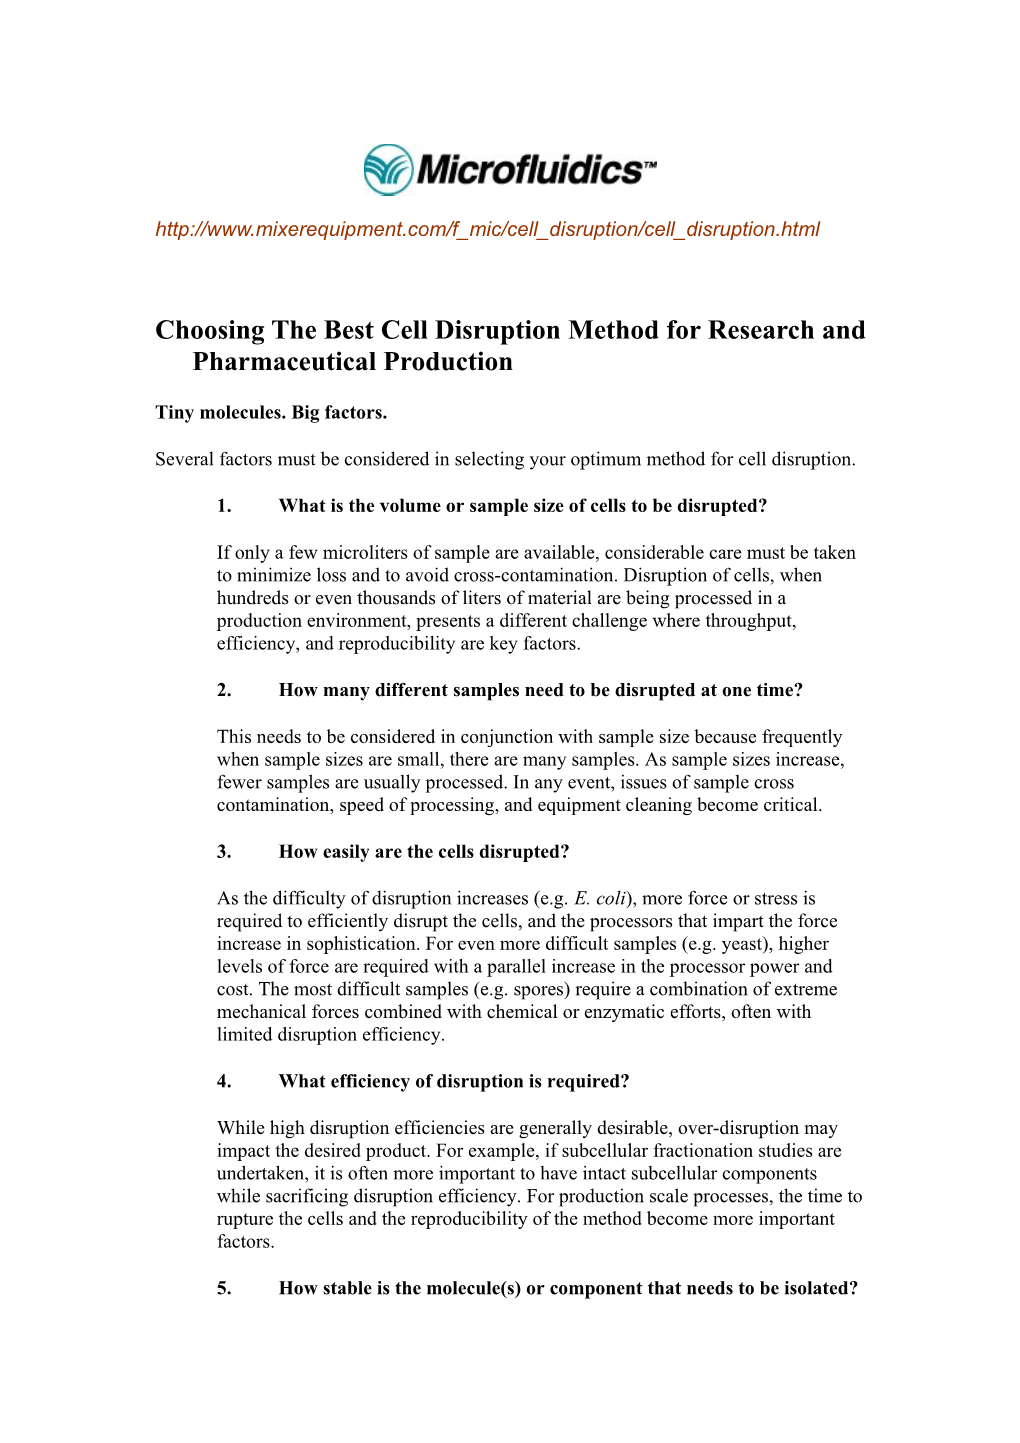 Choosing the Best Cell Disruption Method for Research and Pharmaceutical Production